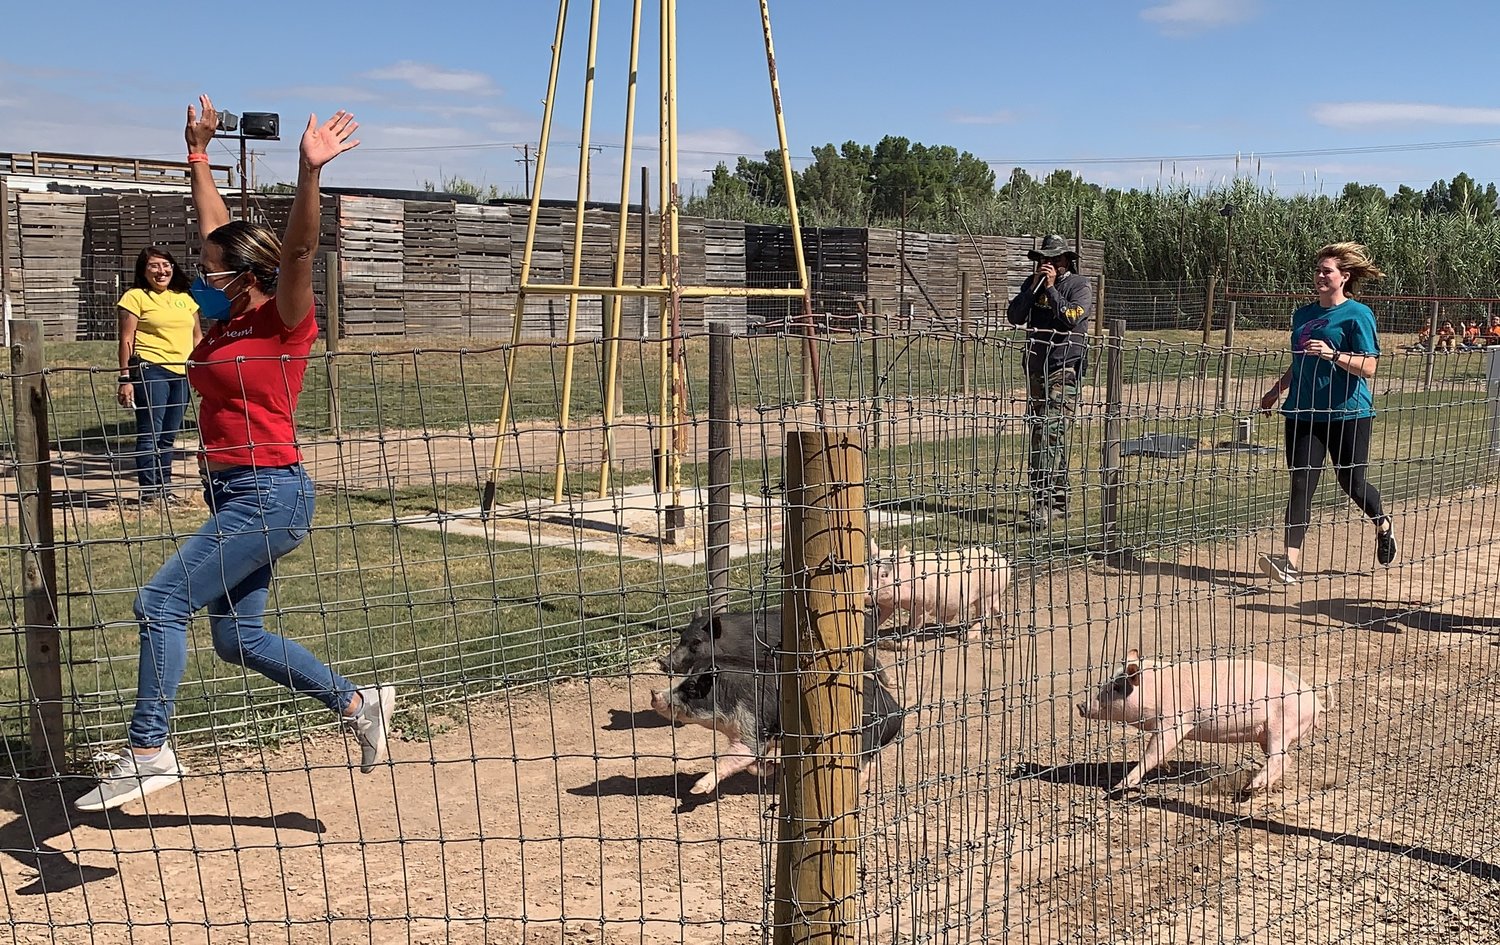 Teachers encourage pigs to race as their students cheer on from outside the fence at the La Union Maze pig races Oct. 13. The maze is open to the public every weekend through Nov. 7.